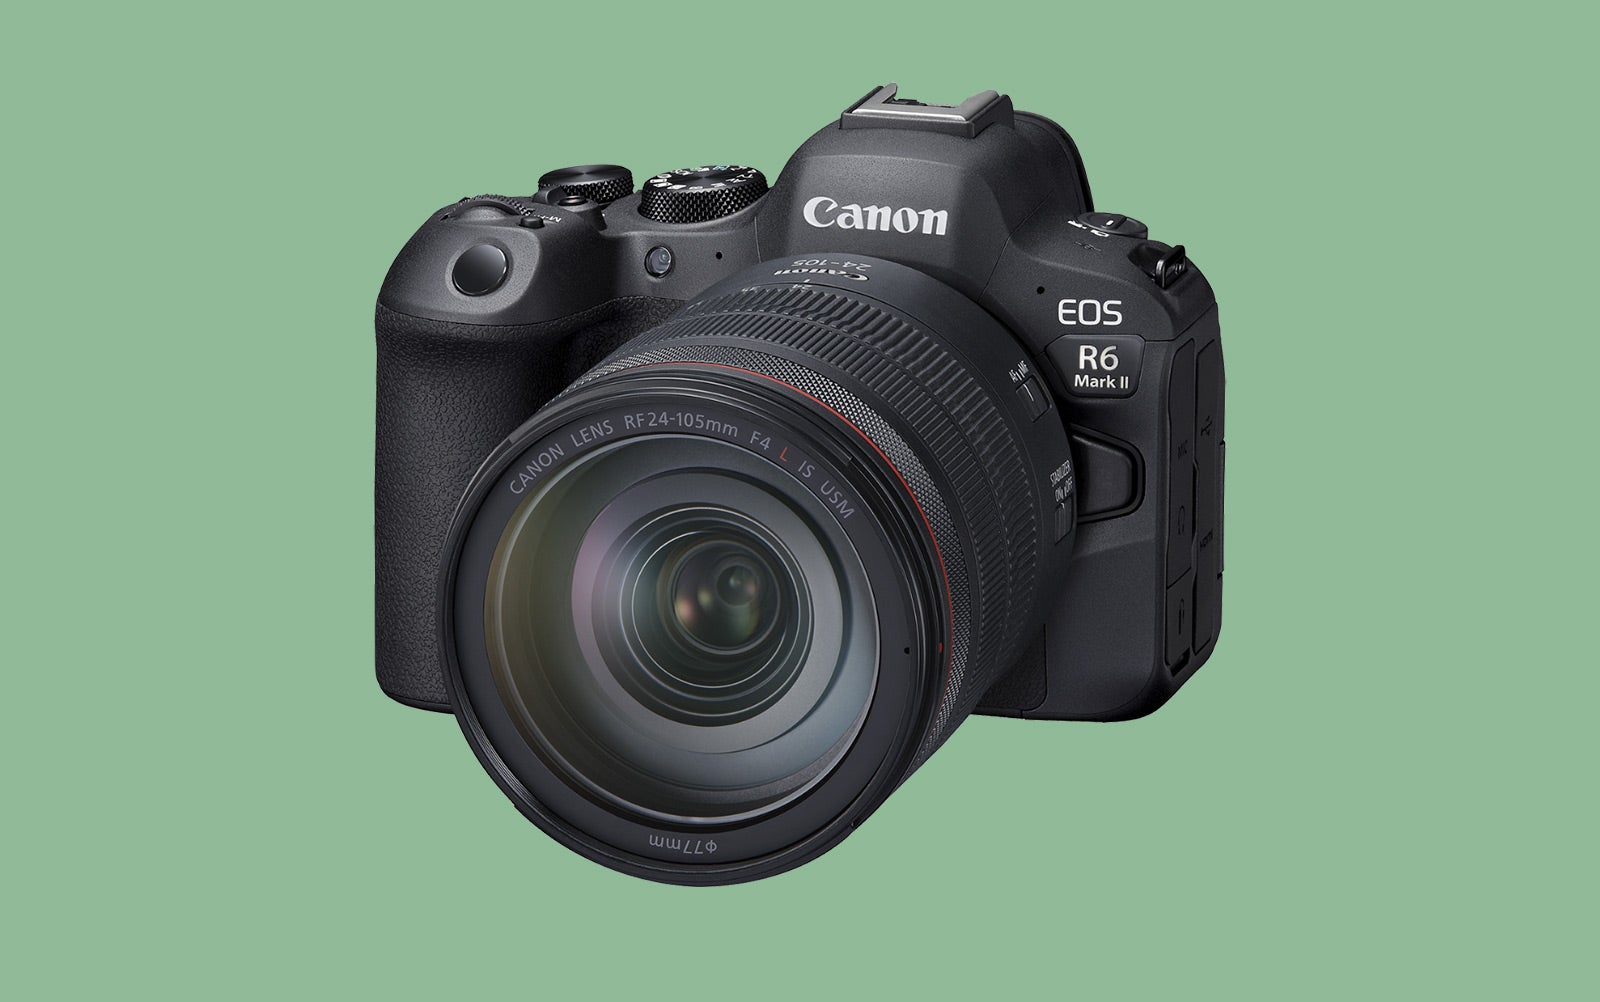 The Canon EOS R6 Mark II has two kit variants.